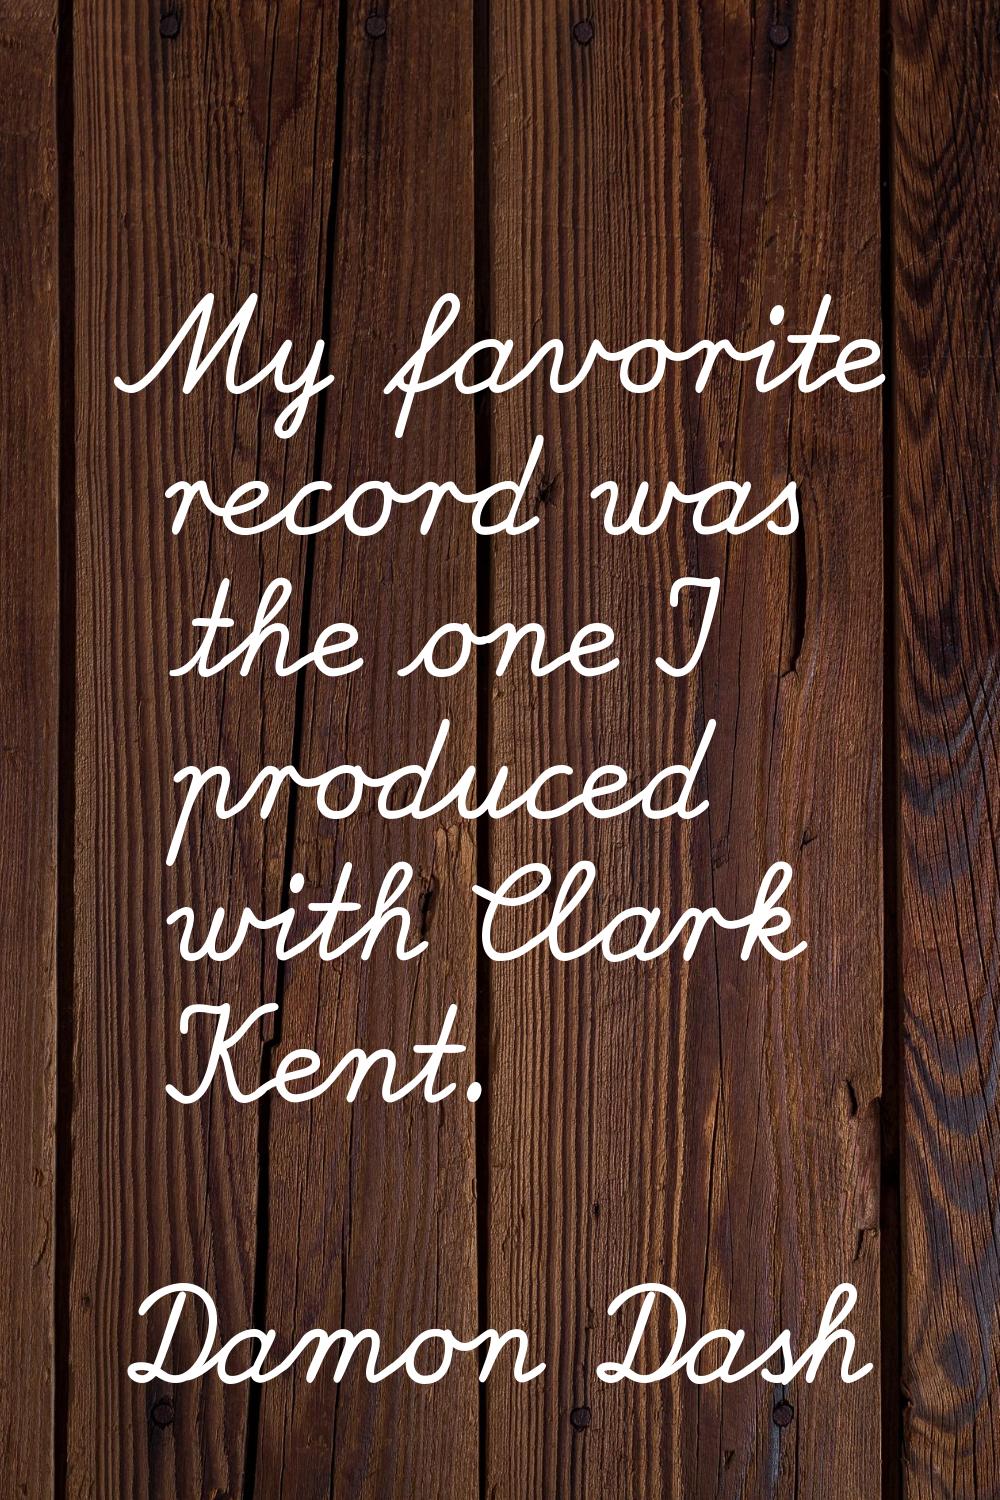 My favorite record was the one I produced with Clark Kent.